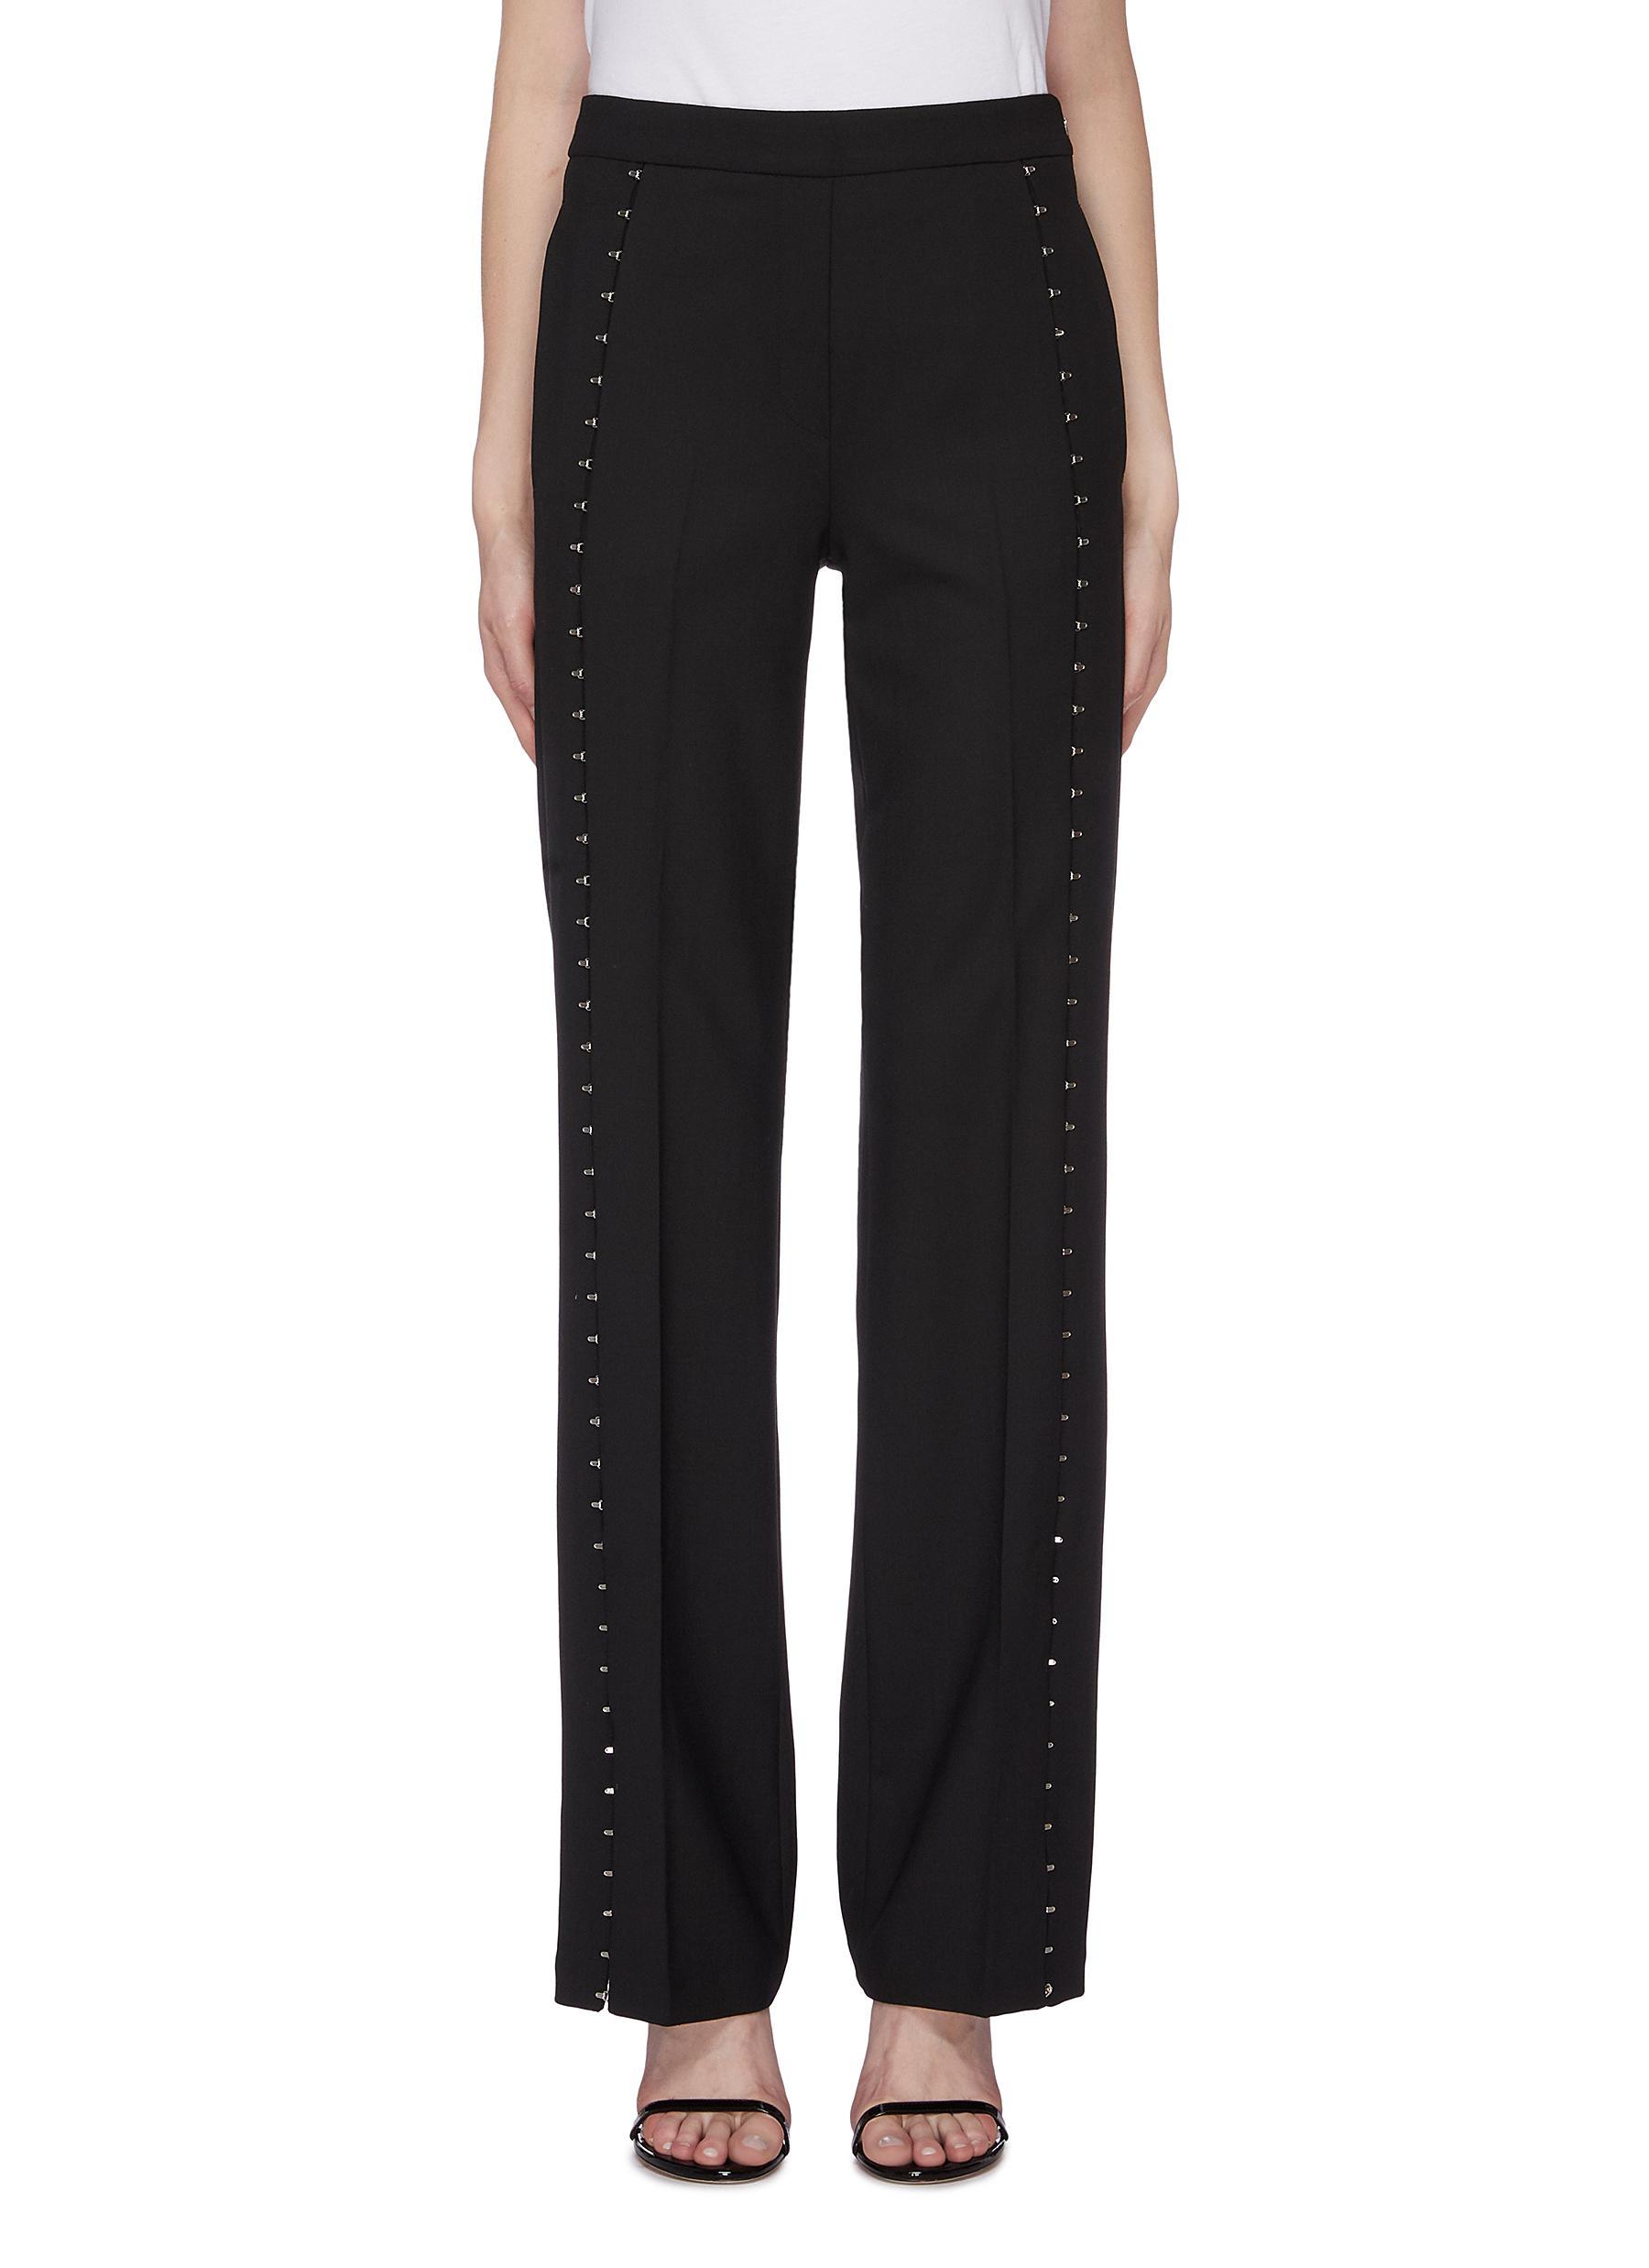 Neil Barrett Synthetic Hook-and-eye Side Suiting Pants in Black - Lyst